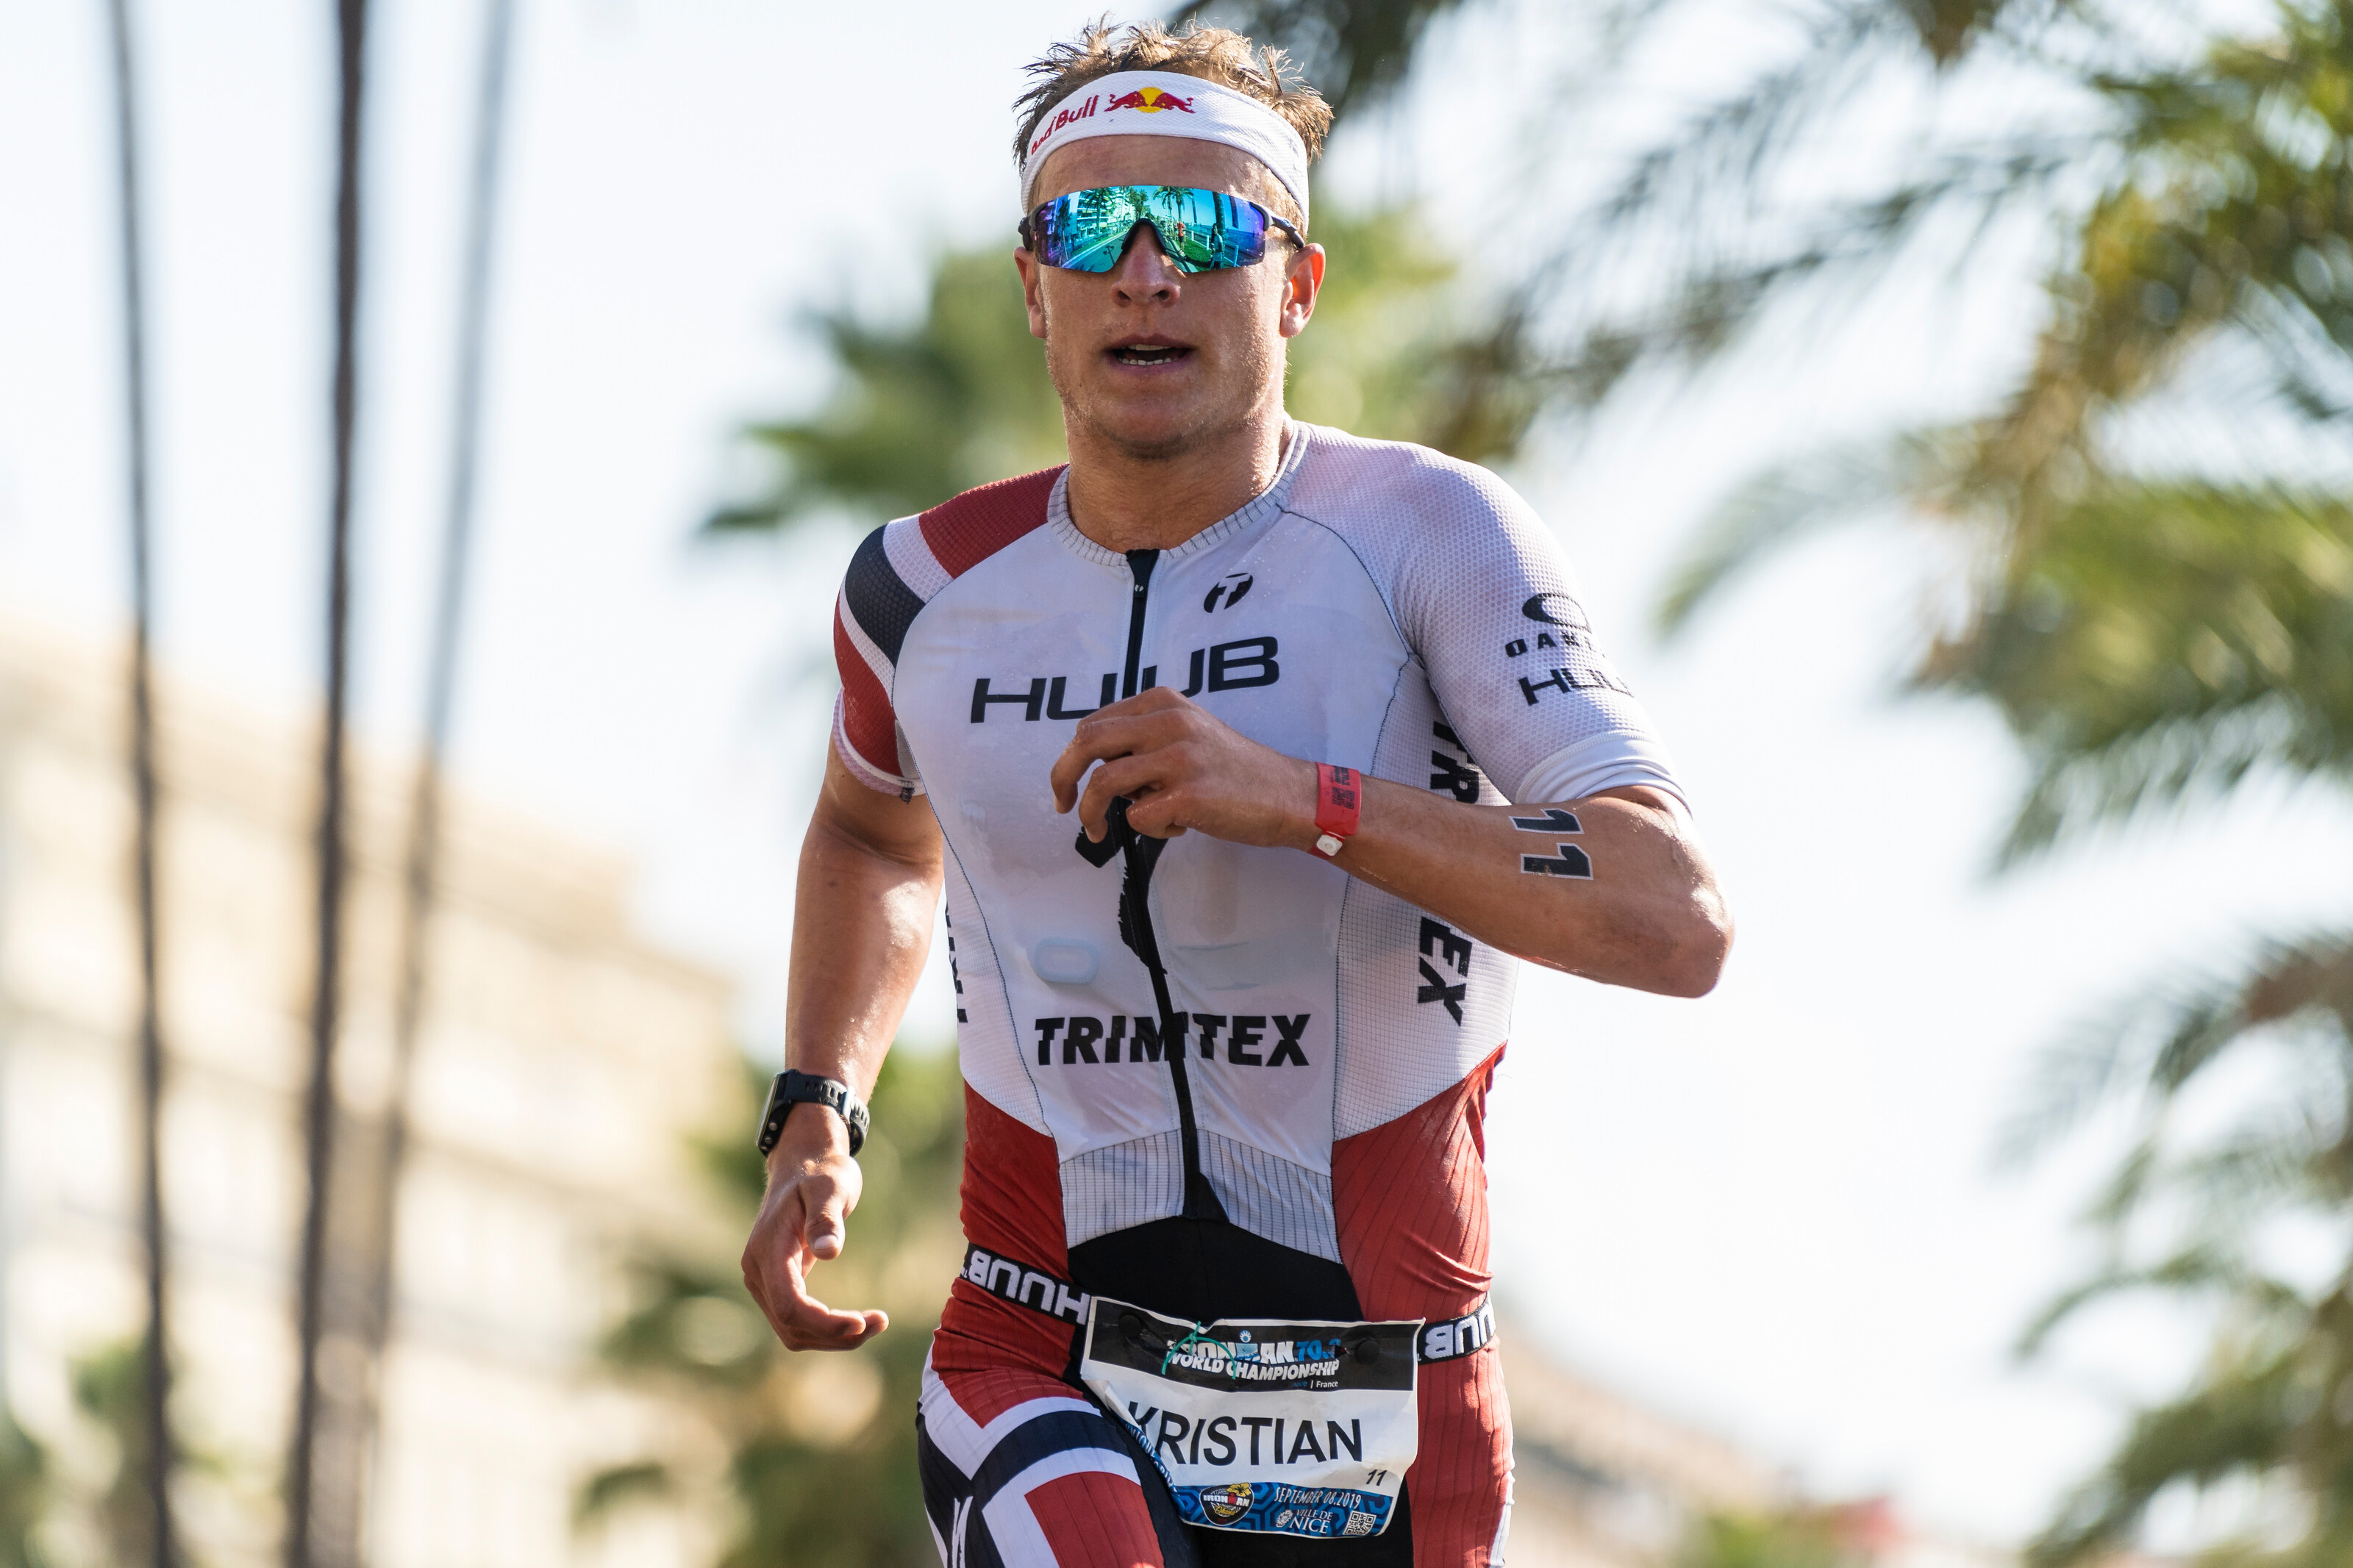 What Is The Ironman Triathlon Record